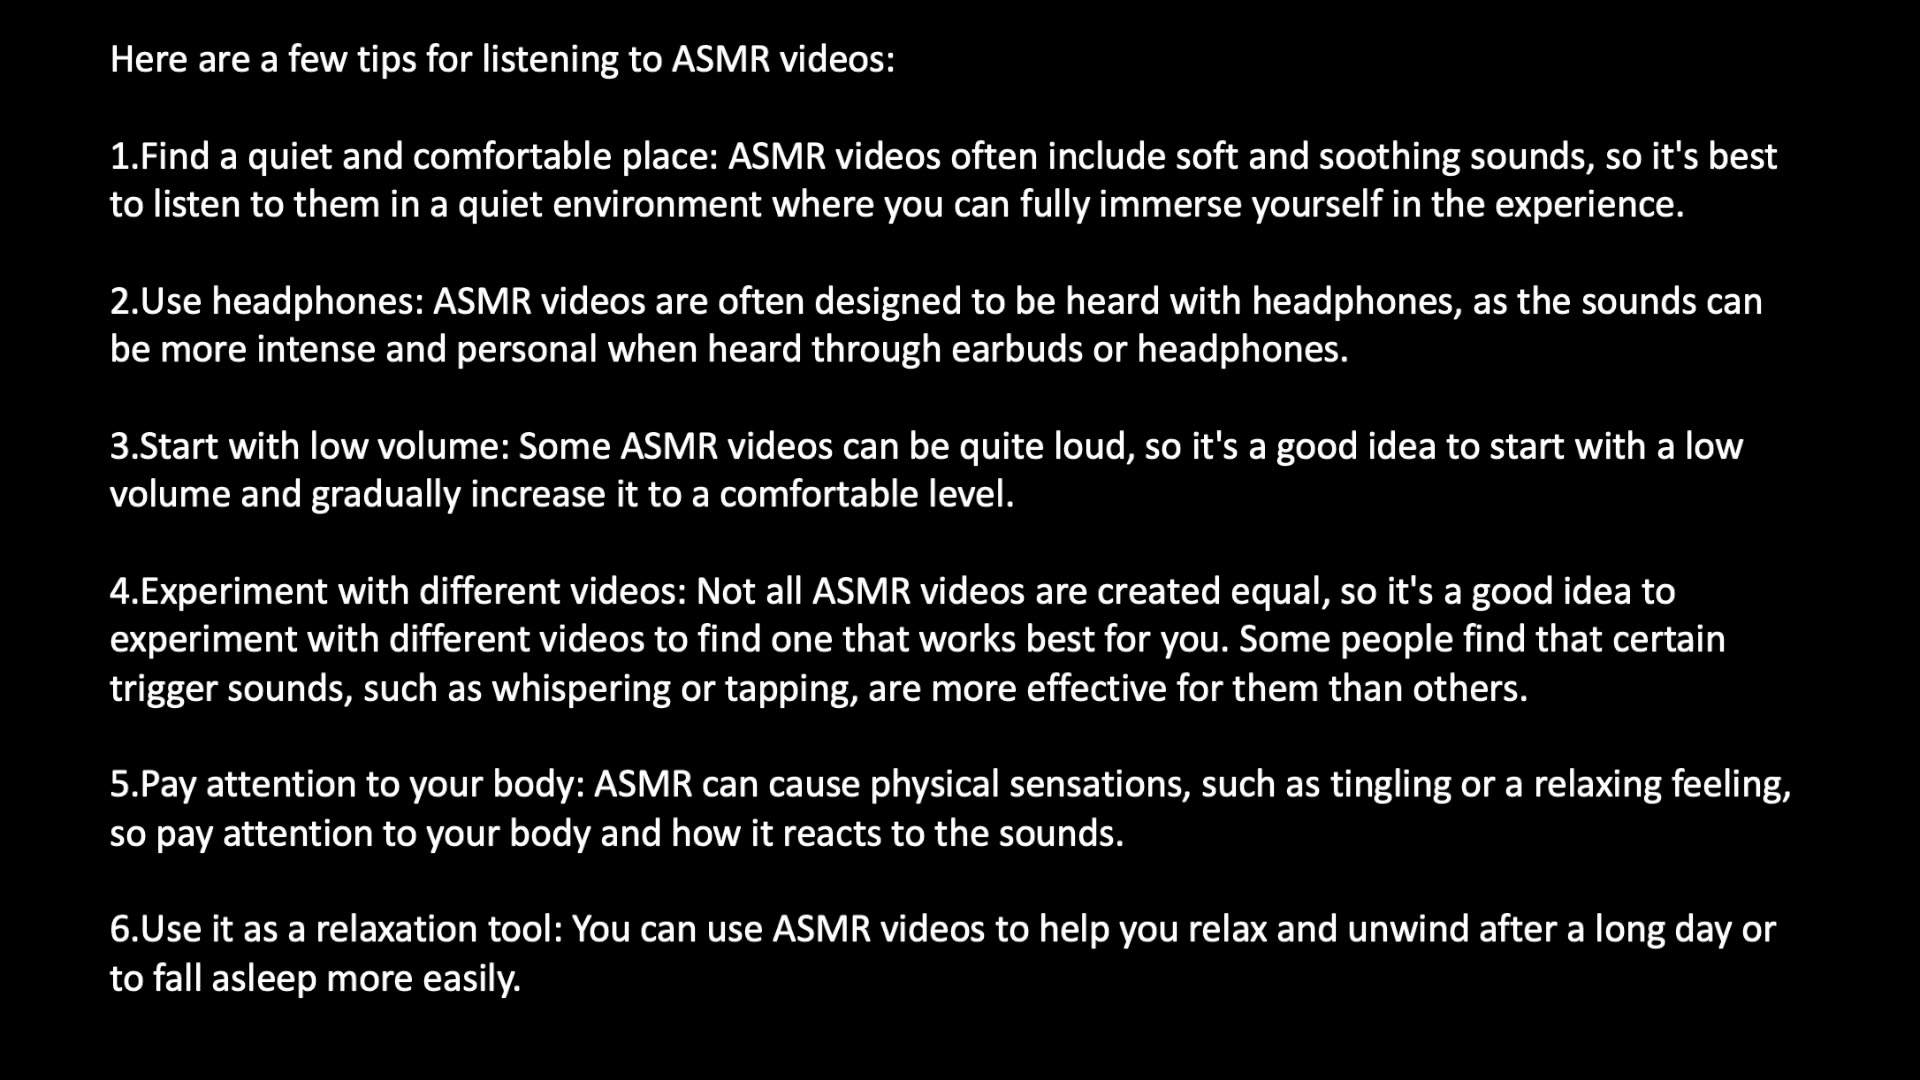 What are ASMR videos and how do I use them?